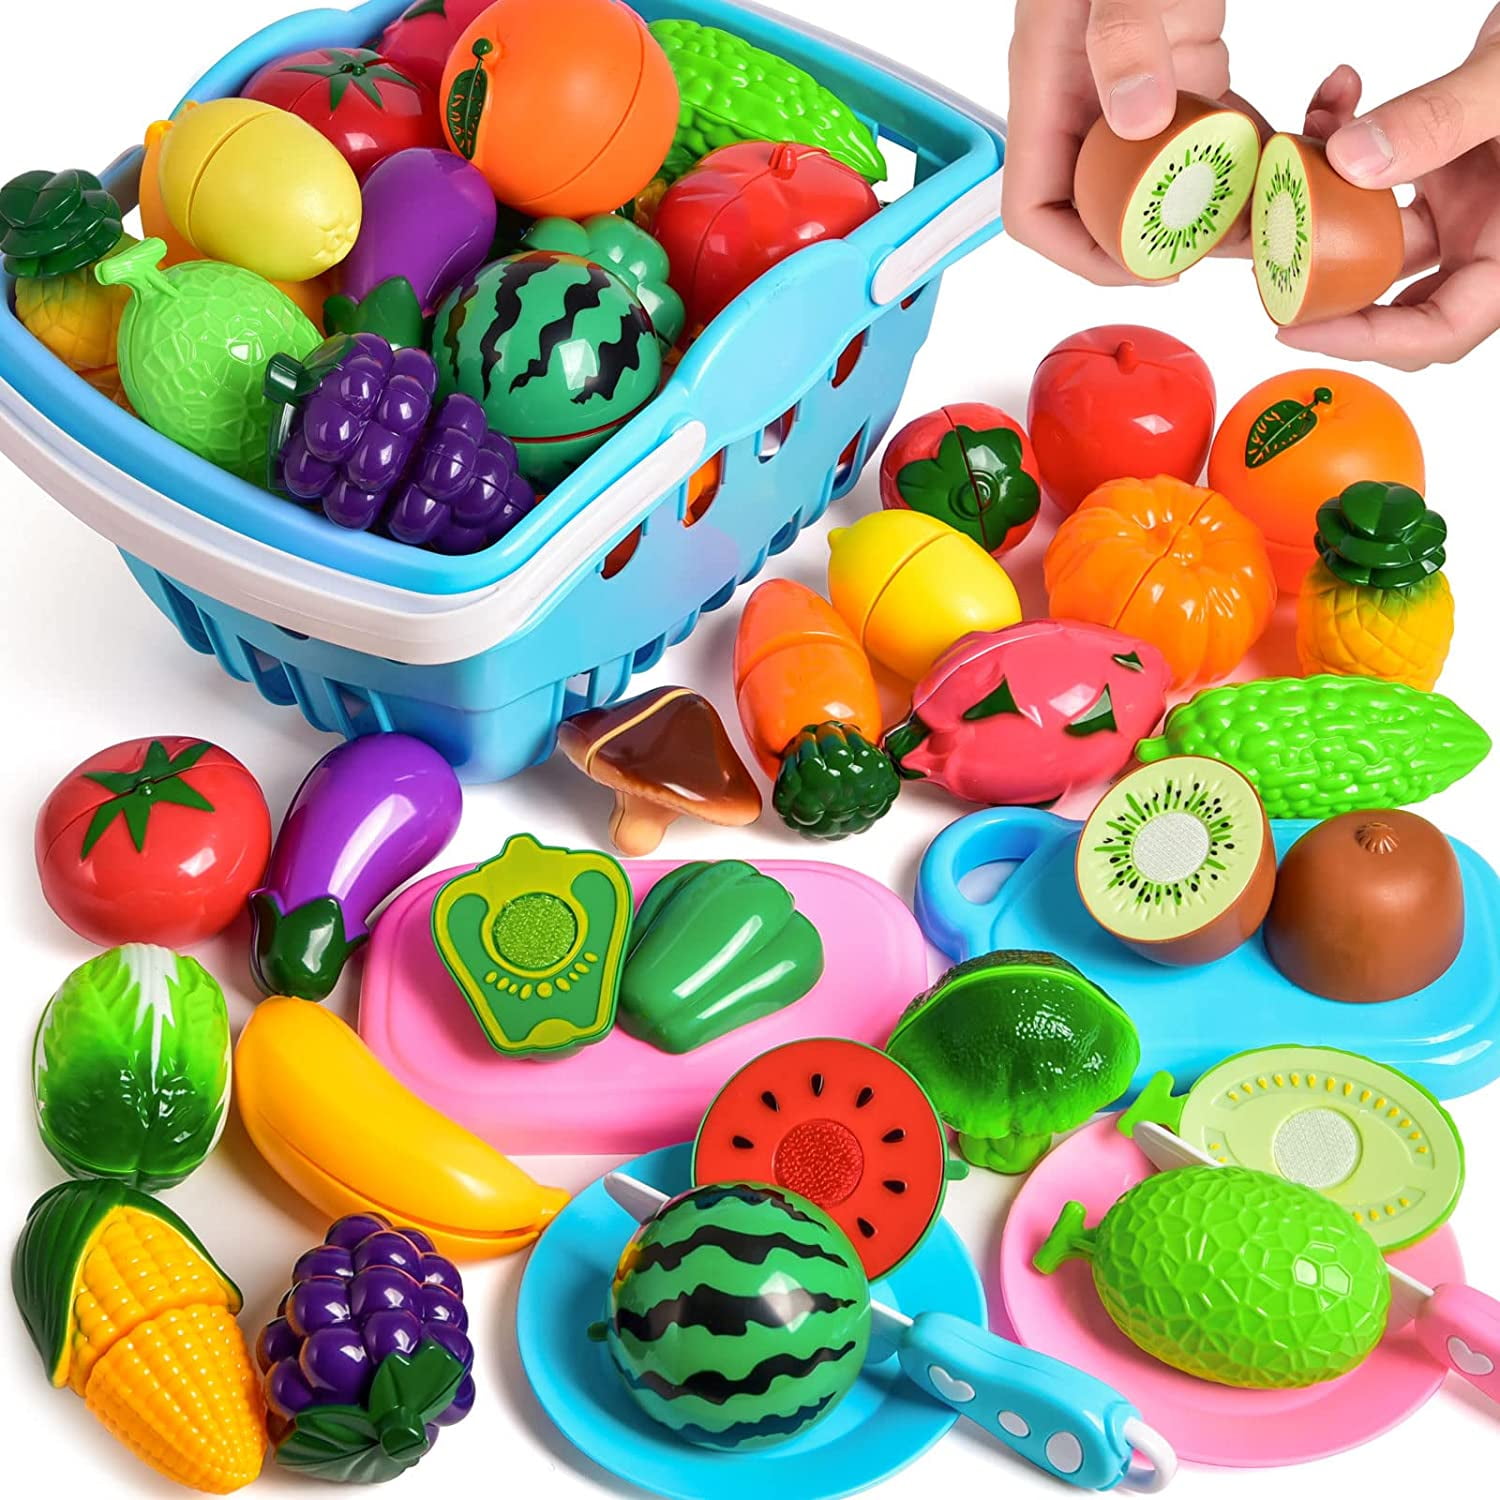 Fun Little Toys Beg1n 30 Pcs Choppable Fruits and Veggies,Play Food for ...